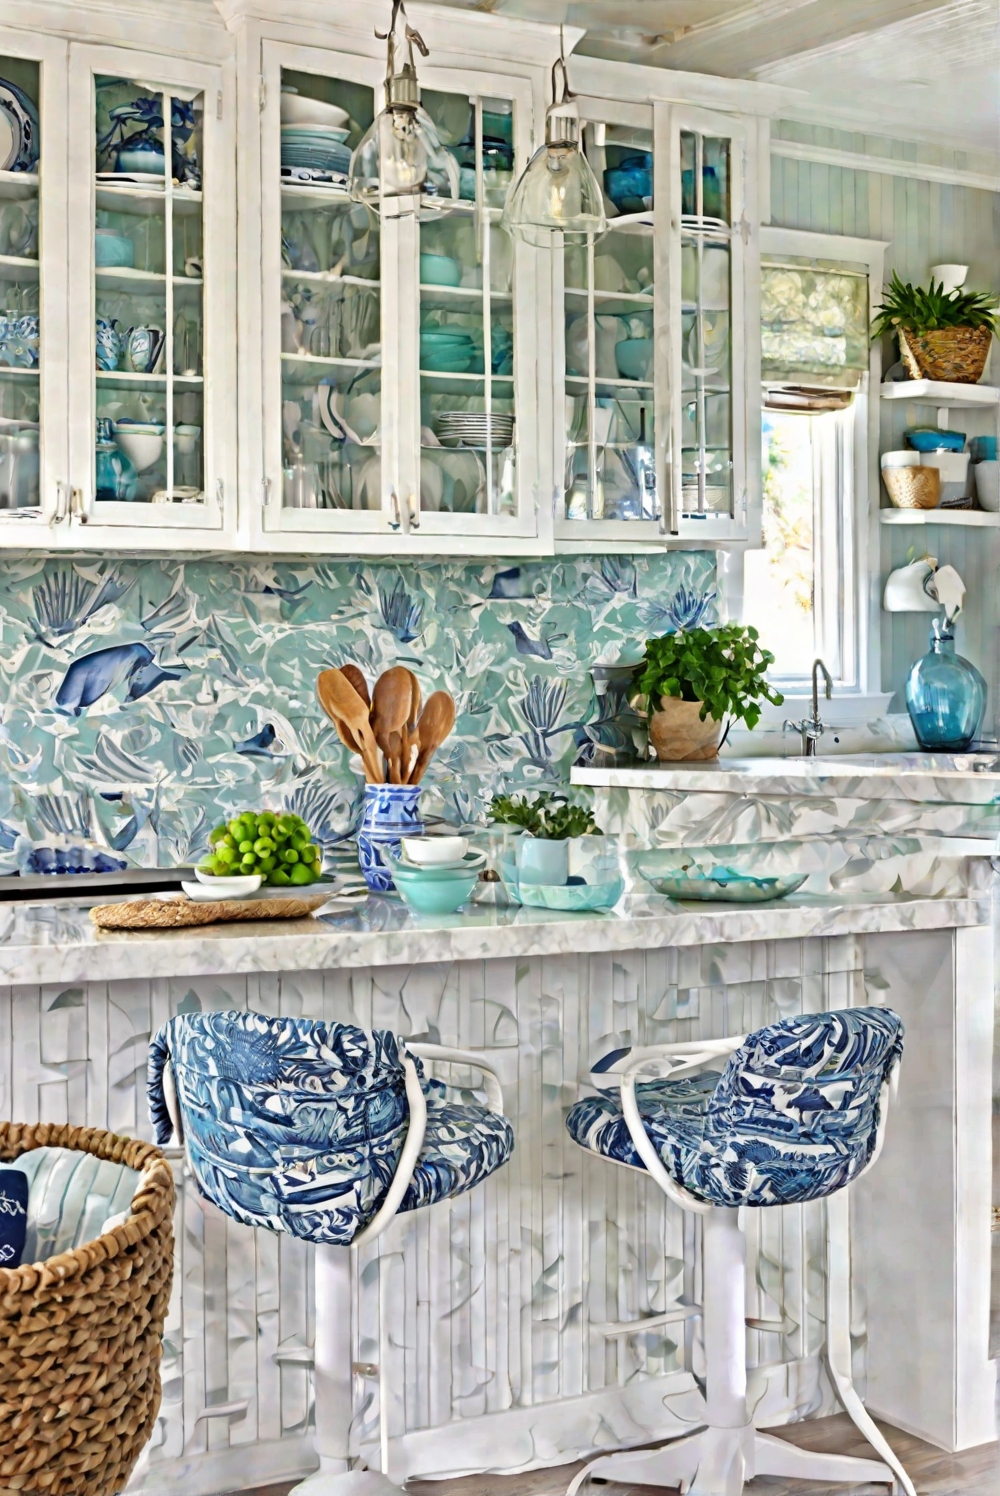 Coastal Serenity: Creating a Relaxing Kitchen Escape